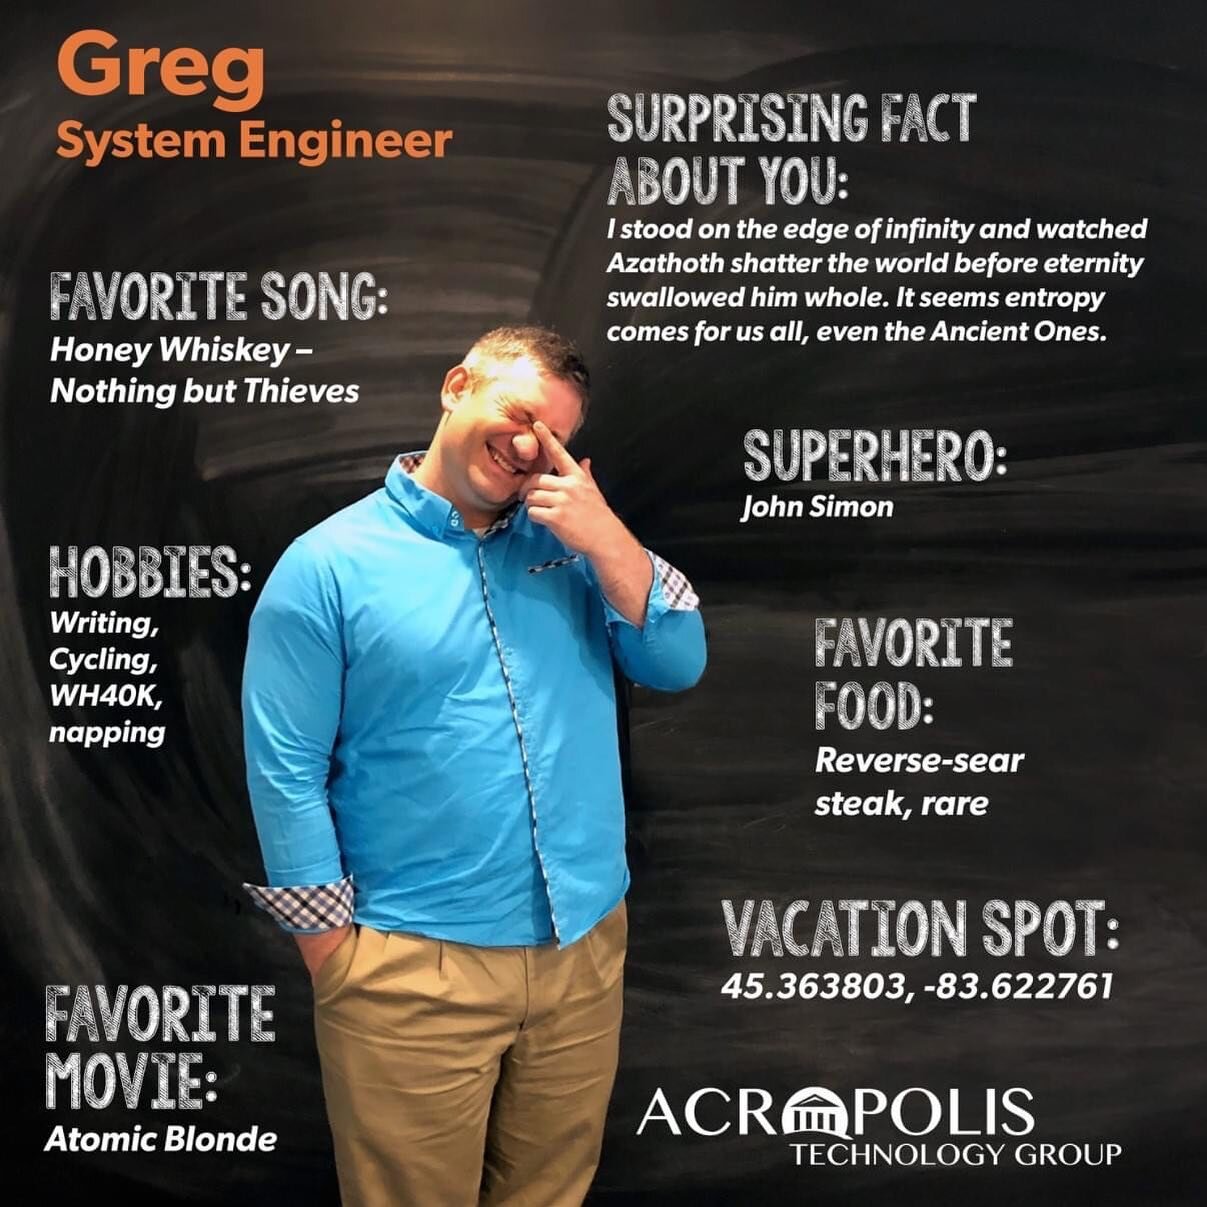 January Employee in the Spotlight:
Greg - System Engineer
We want to call attention to Greg for all of his recent hard work over Christmas weekend for one of our clients. He had them up and running by that Monday. Greg is the perfect example of why o